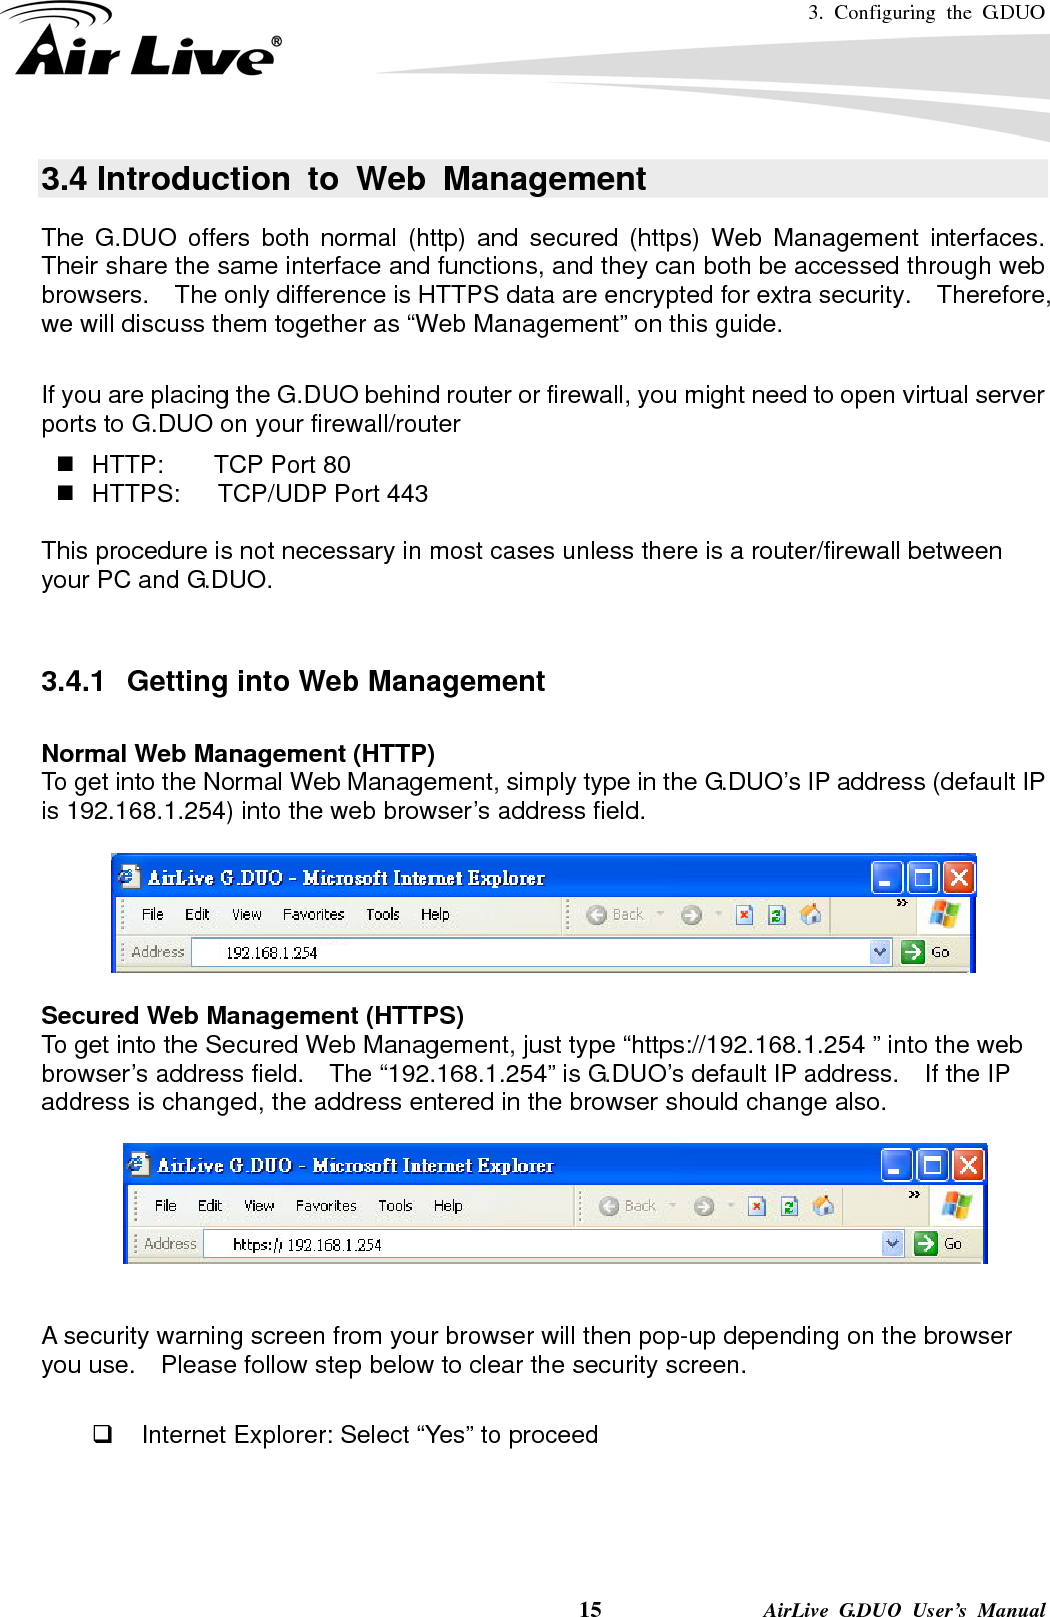 3. Configuring the G.DUO    15              AirLive G.DUO User’s Manual 3.4 Introduction to Web Management The G.DUO offers both normal (http) and secured (https) Web Management interfaces.  Their share the same interface and functions, and they can both be accessed through web browsers.    The only difference is HTTPS data are encrypted for extra security.    Therefore, we will discuss them together as “Web Management” on this guide.  If you are placing the G.DUO behind router or firewall, you might need to open virtual server ports to G.DUO on your firewall/router   HTTP:    TCP Port 80   HTTPS:   TCP/UDP Port 443  This procedure is not necessary in most cases unless there is a router/firewall between your PC and G.DUO.   3.4.1  Getting into Web Management  Normal Web Management (HTTP) To get into the Normal Web Management, simply type in the G.DUO’s IP address (default IP is 192.168.1.254) into the web browser’s address field.        Secured Web Management (HTTPS) To get into the Secured Web Management, just type “https://192.168.1.254 ” into the web browser’s address field.    The “192.168.1.254” is G.DUO’s default IP address.    If the IP address is changed, the address entered in the browser should change also.     A security warning screen from your browser will then pop-up depending on the browser you use.    Please follow step below to clear the security screen.    Internet Explorer: Select “Yes” to proceed 